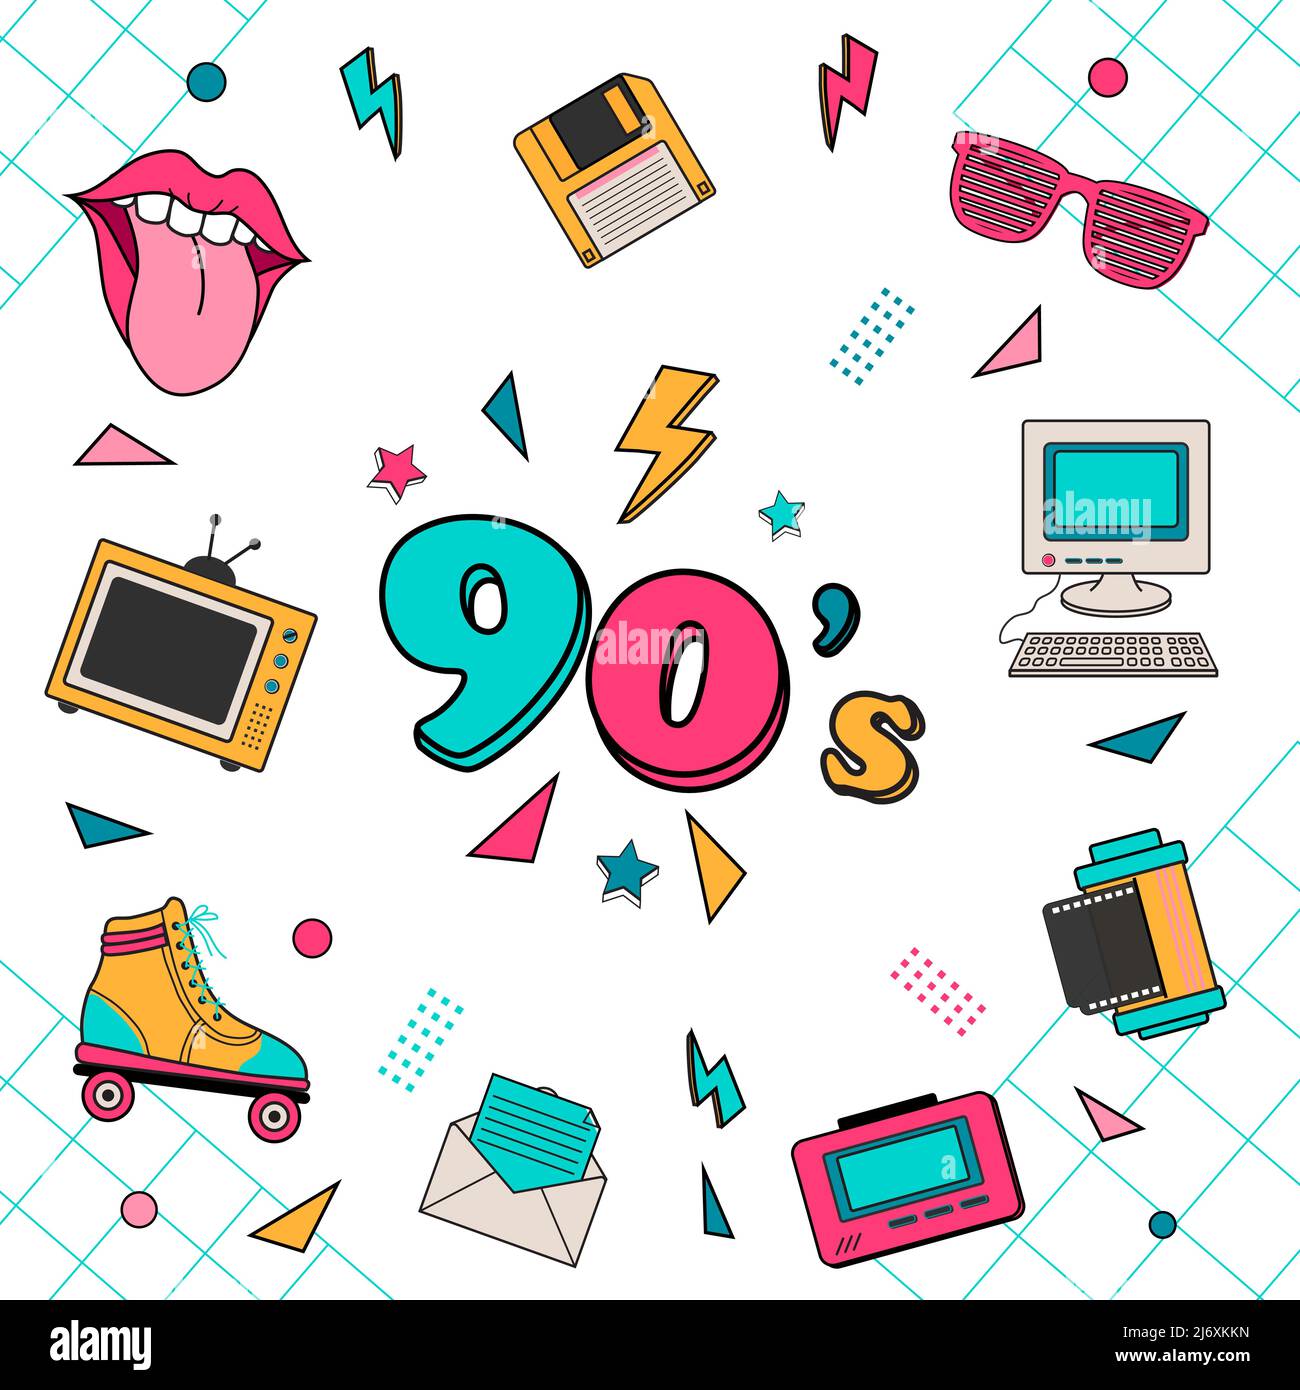 Classic 80s 90s elements Stickers vector illustration. Stock Vector